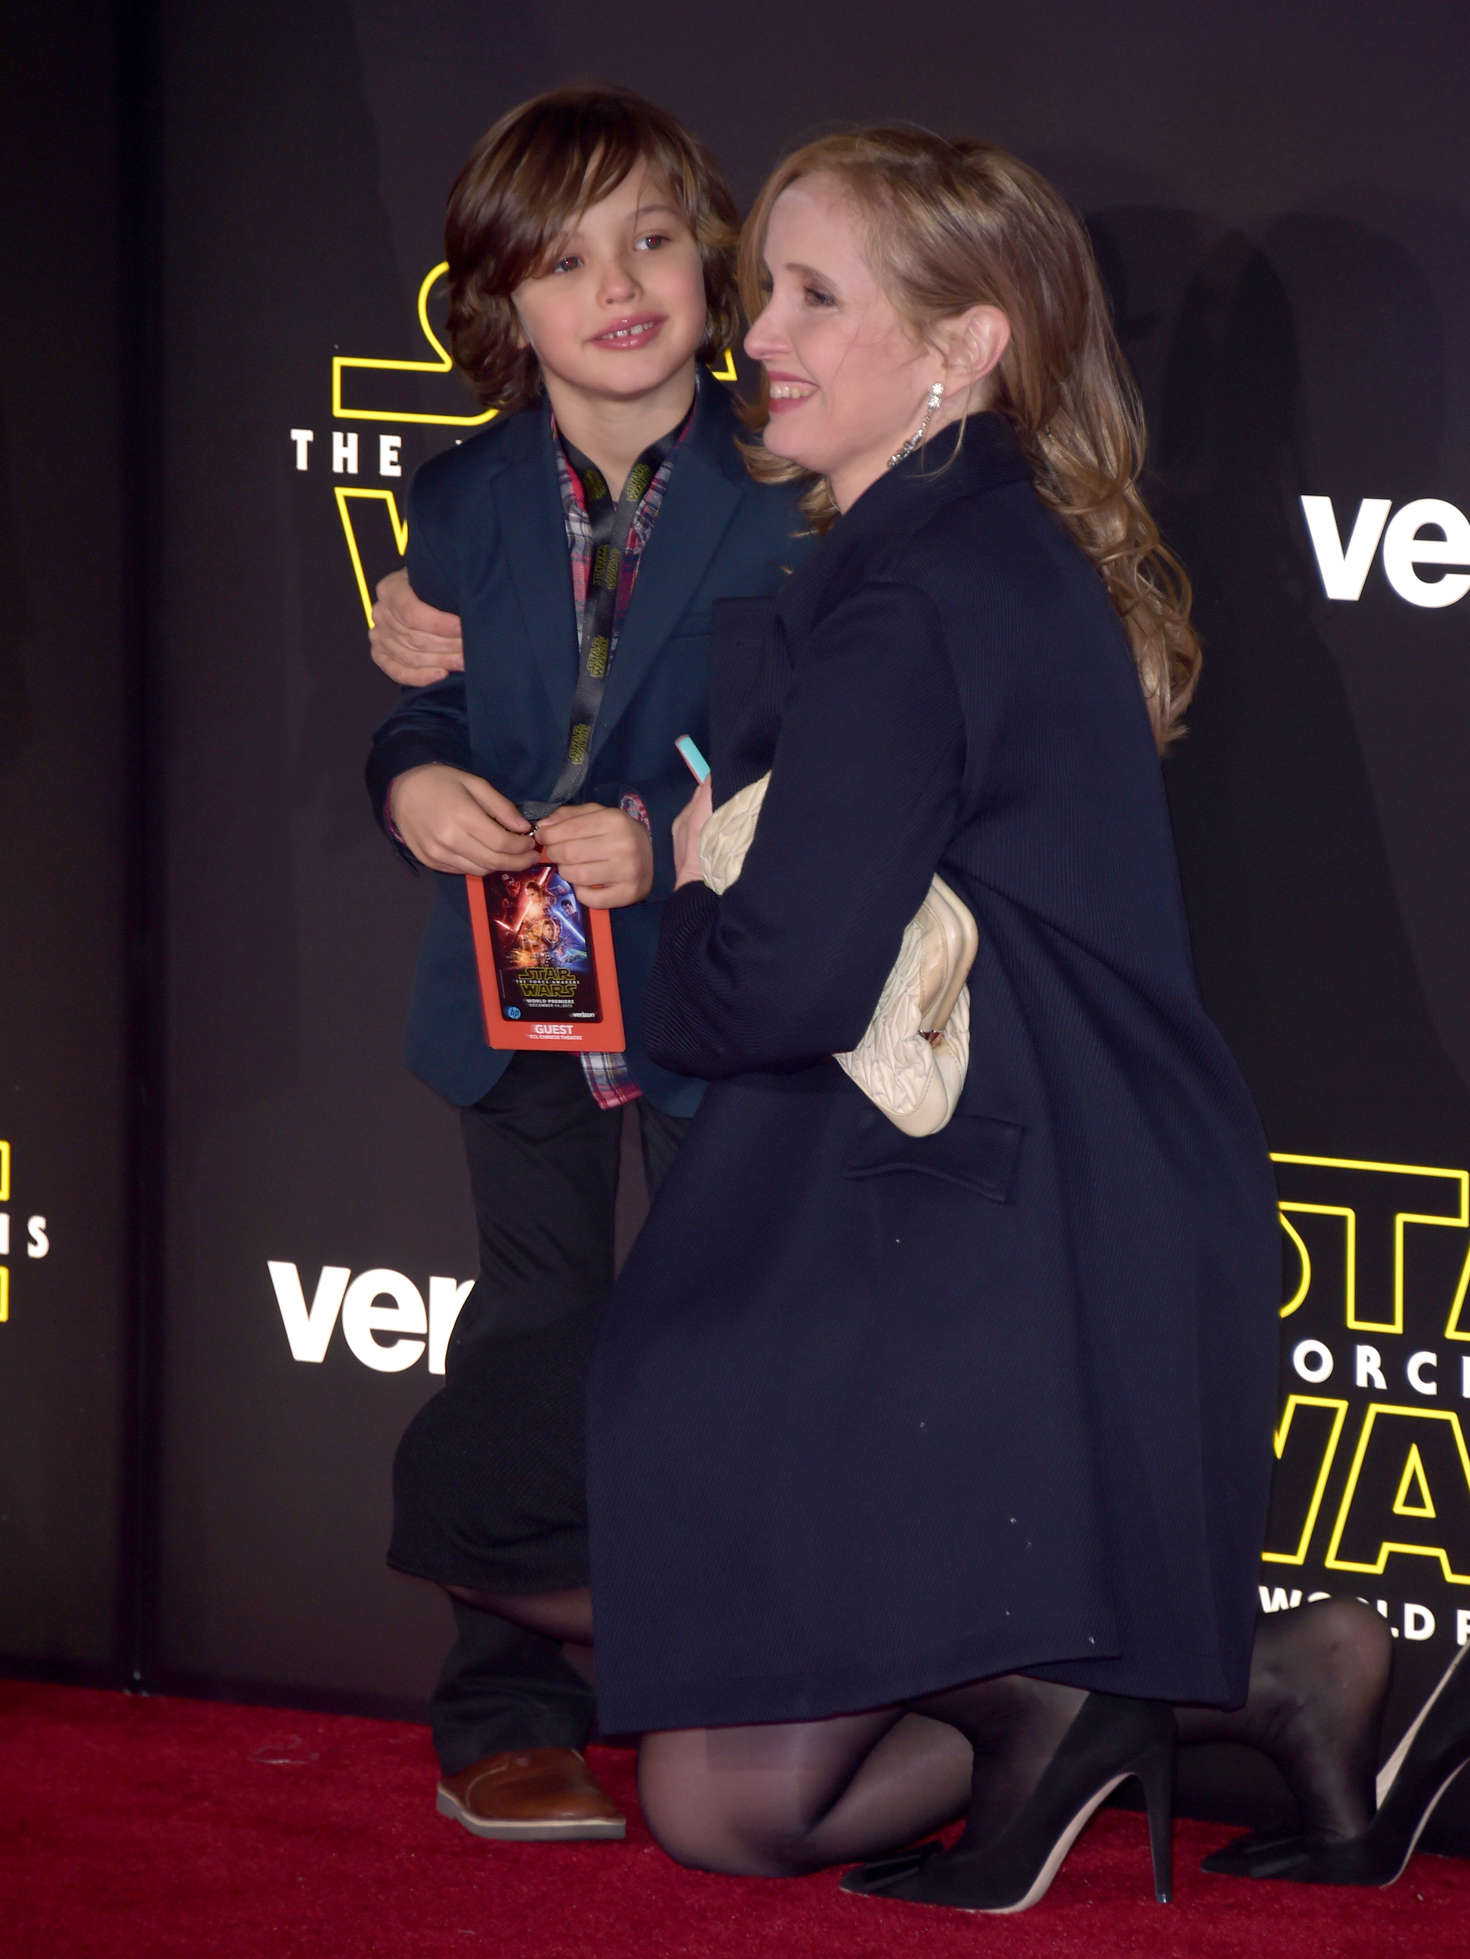 Julie Delpy Star Wars The Force Awakens Premiere in Hollywood